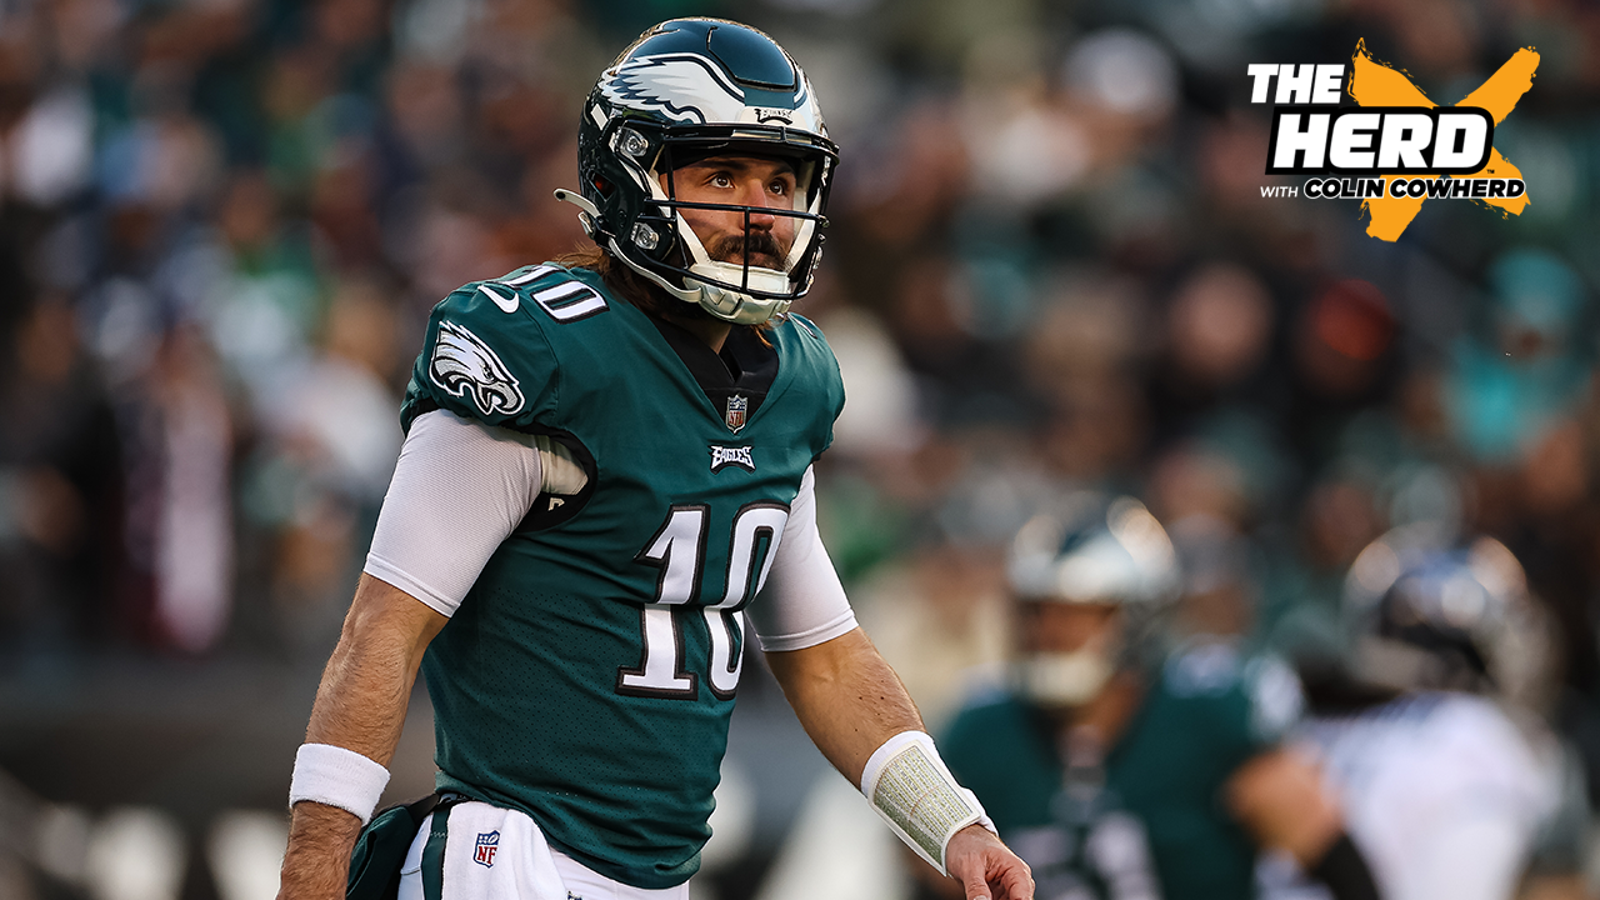 If Gardner Minshew starts vs. Cowboys, can Eagles come away with a win?